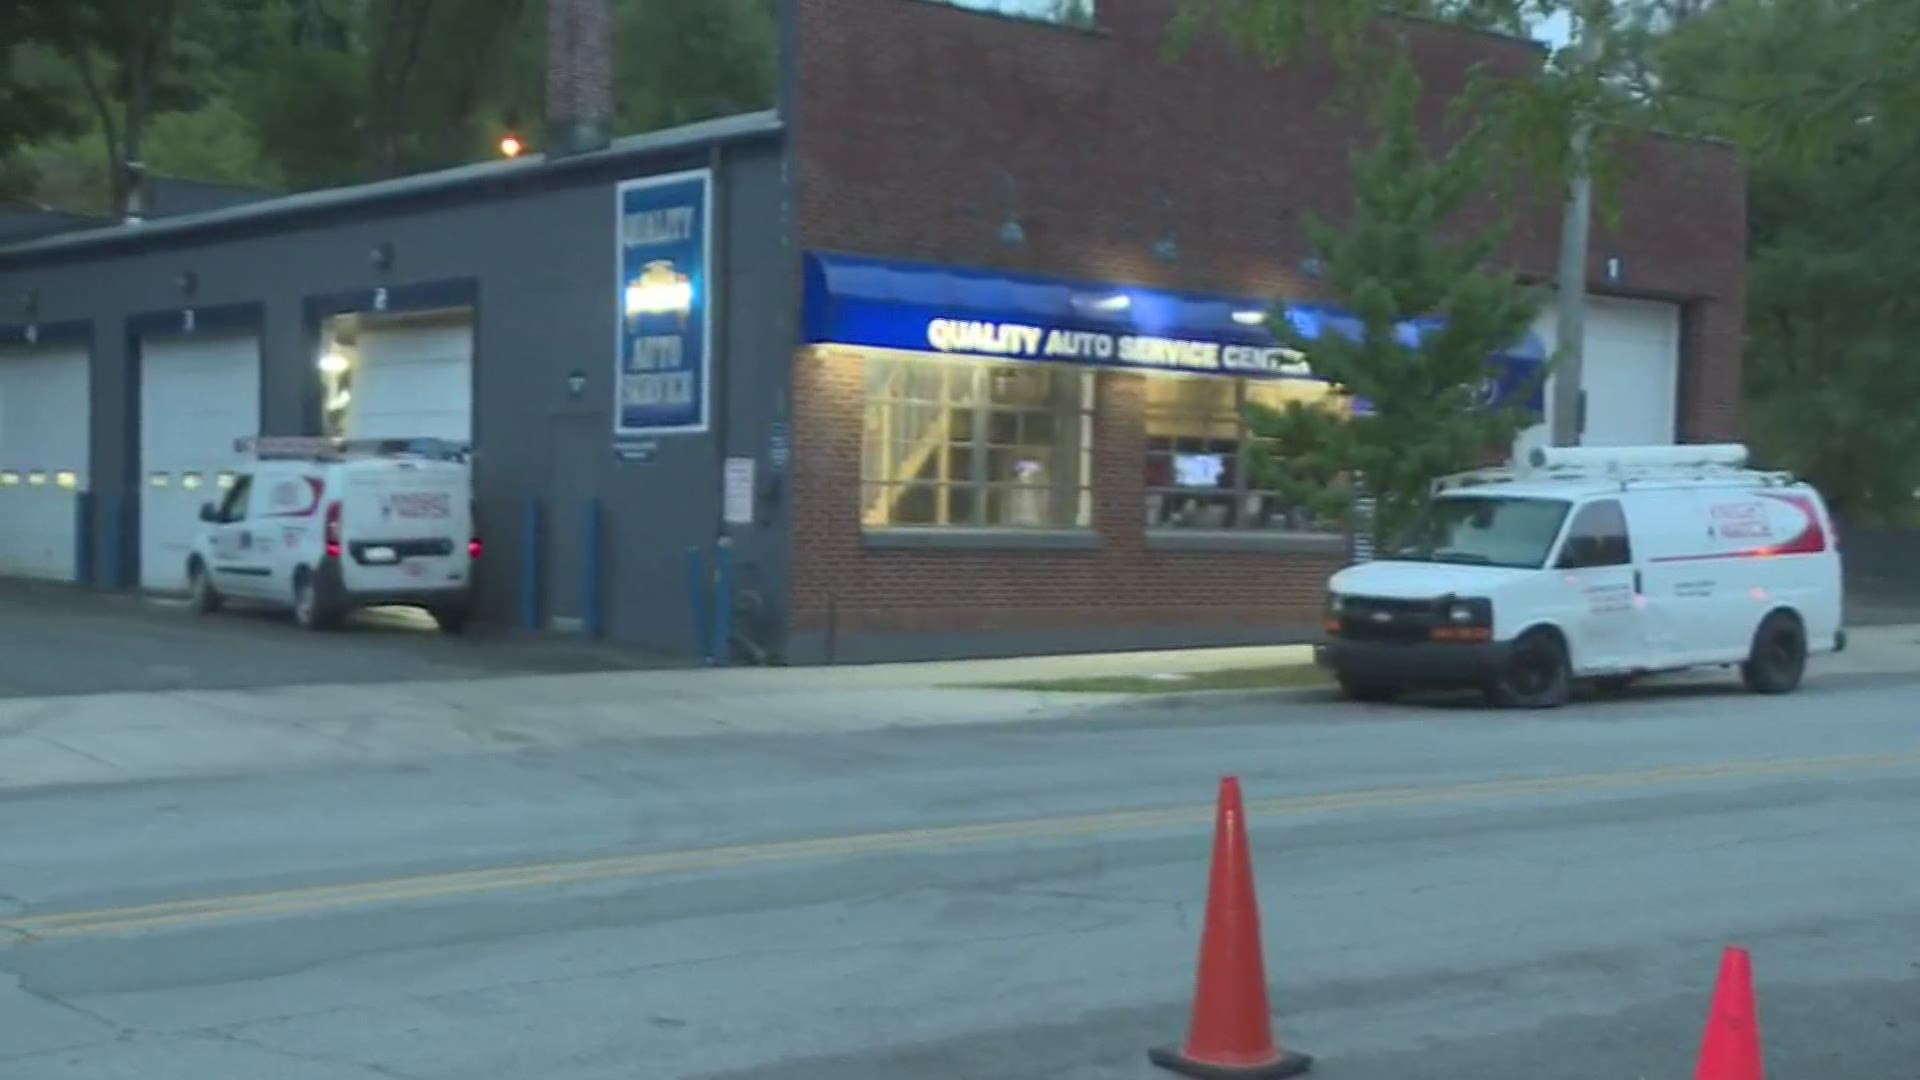 Authorities in Grand Rapids are investigating two break-ins at auto businesses in the city Wednesday morning.